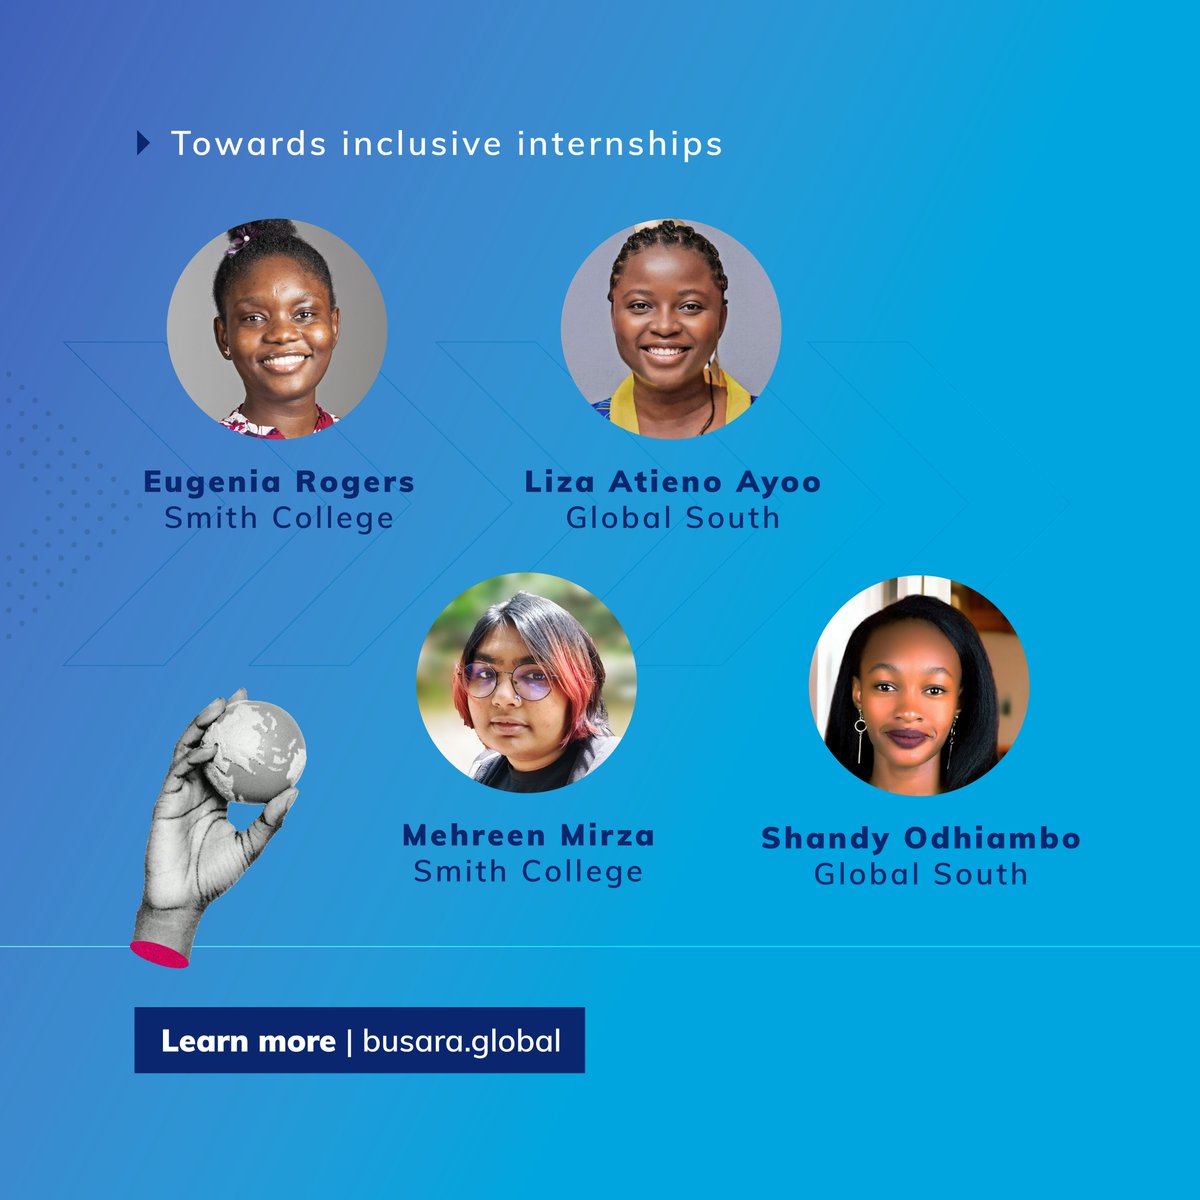 To celebrate our new partnership with Smith College, we are happy to welcome the first four interns sponsored by Smith College; 1) Eugenia Rogers, pursuing a B.A degree in Environmental Science and Policy at @smithcollege , United States 2) Liza Atieno Ayoo, pursuing an M.A